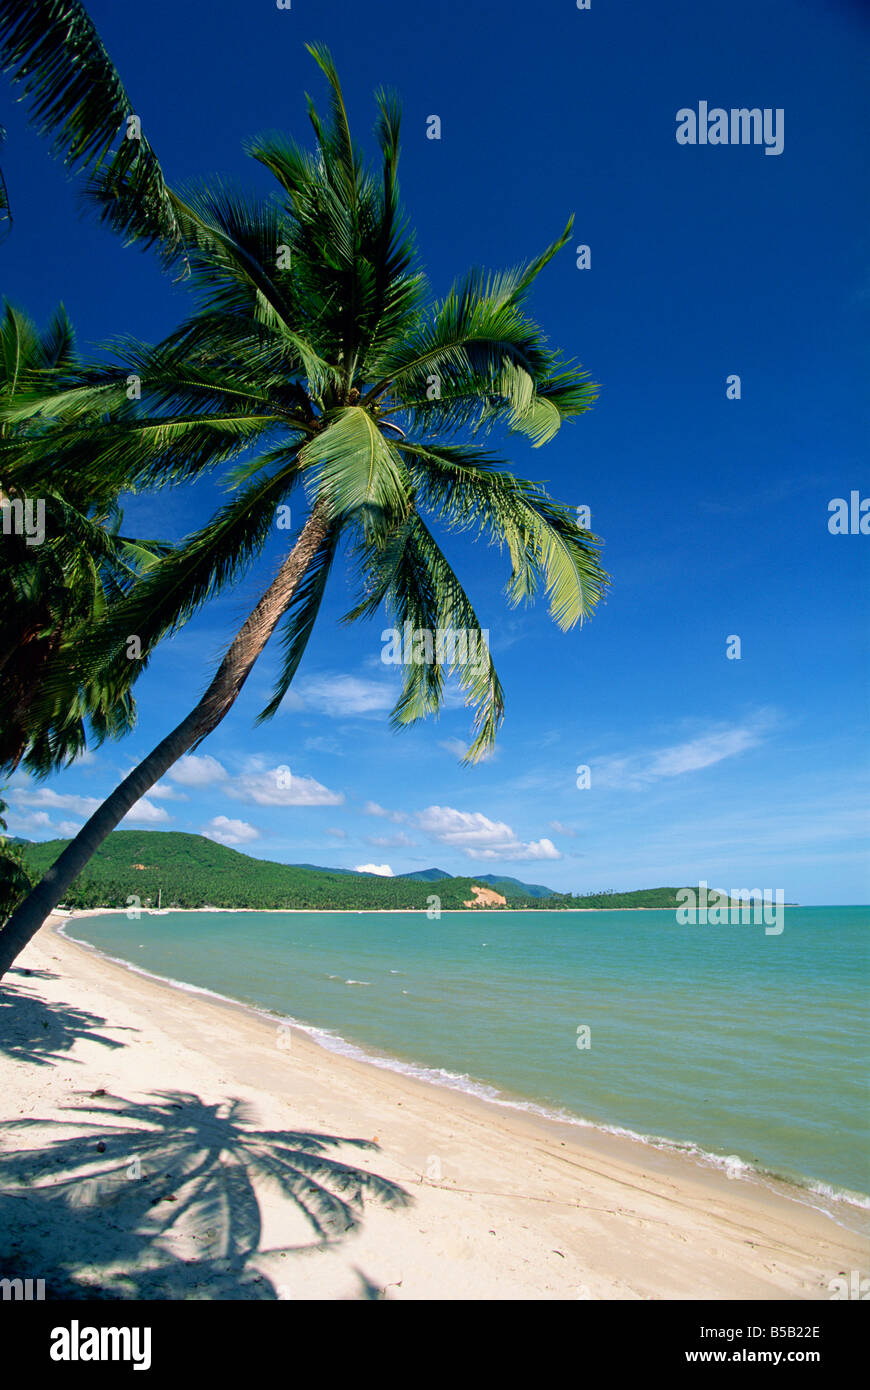 Bophut meaning Big Buddha, a quiet backpackers beach on the resort island of Koh Samui, Thailand, Southeast Asia Stock Photo